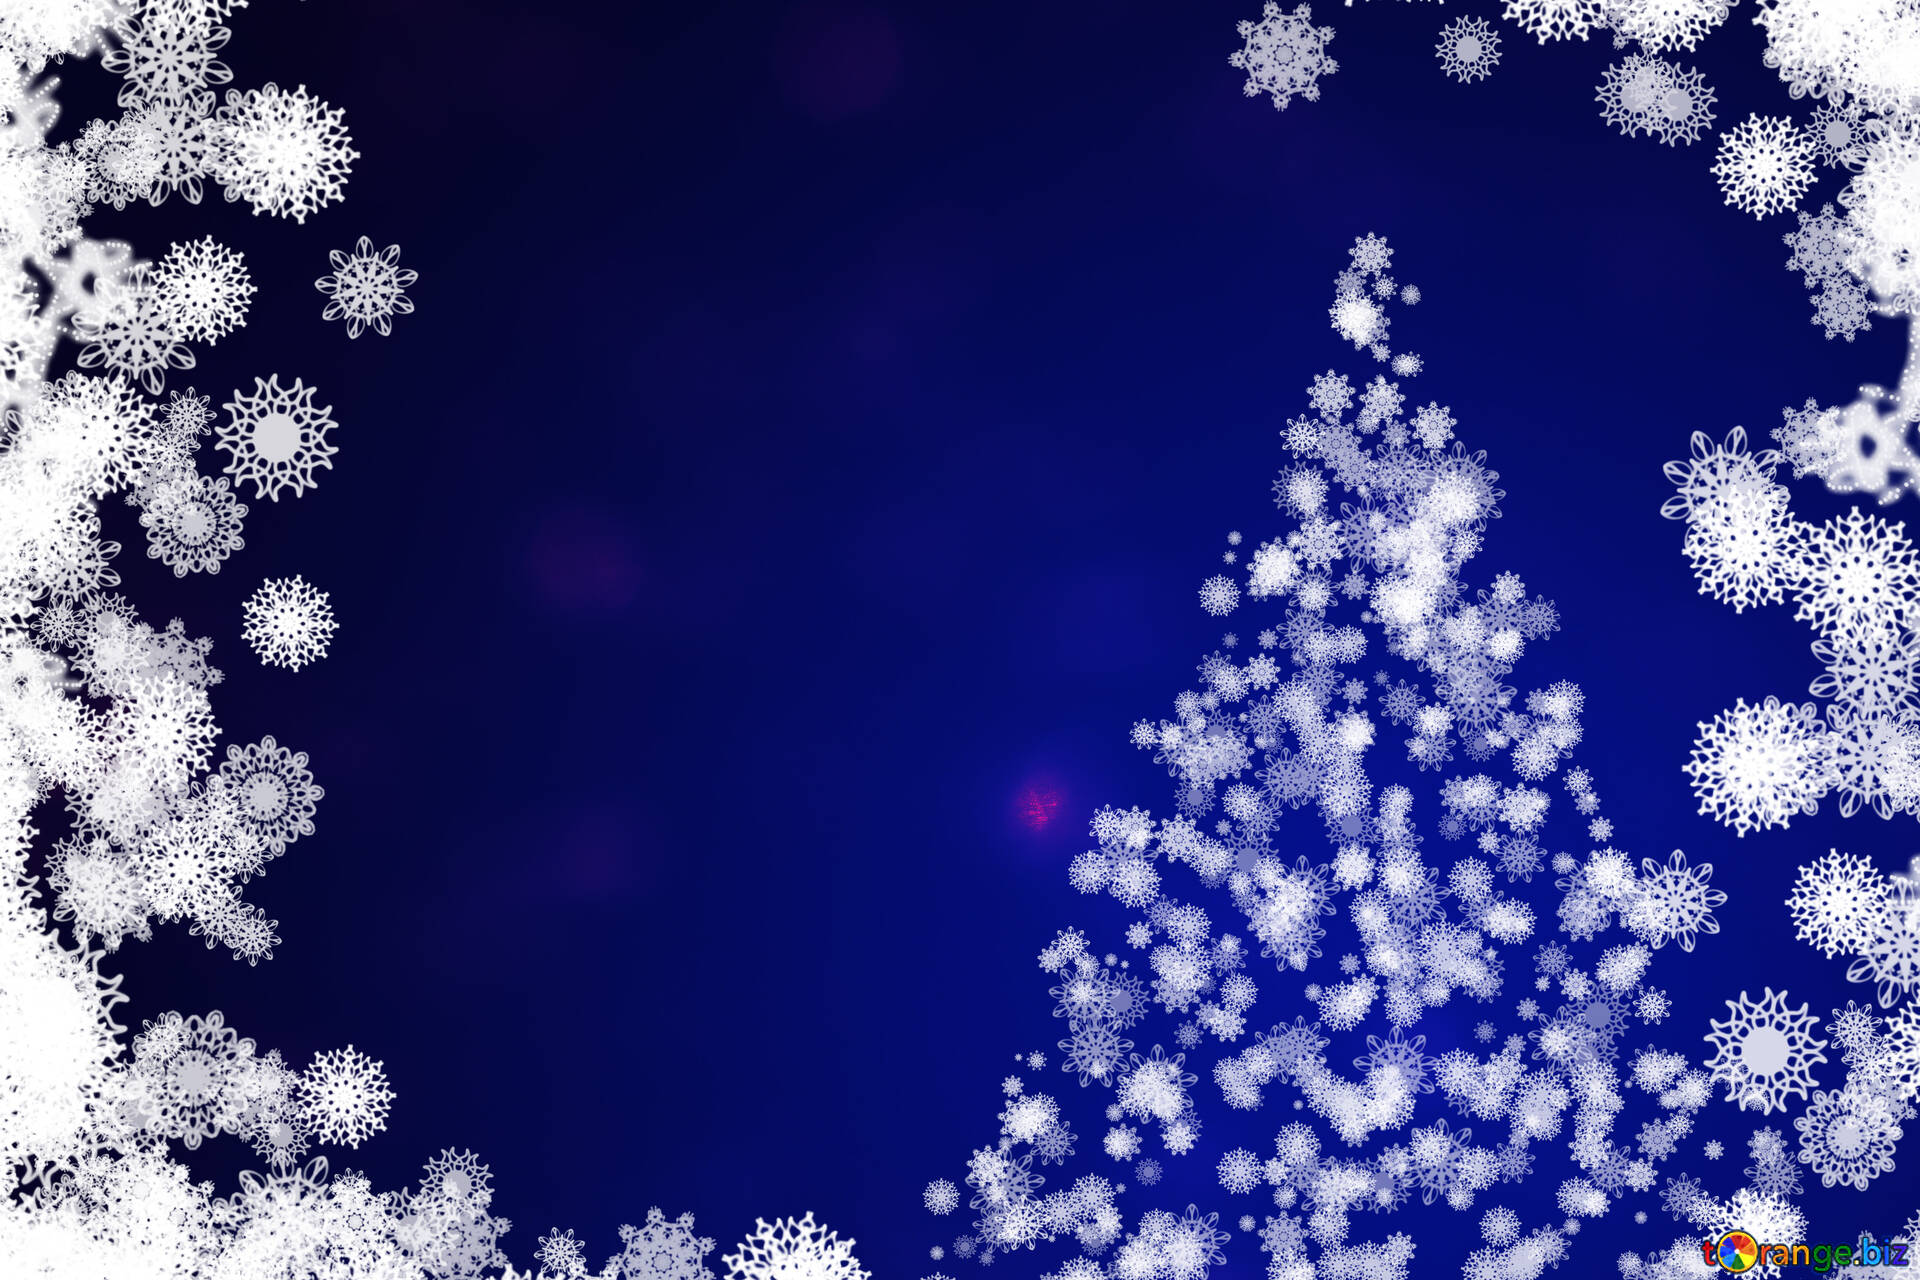 Christmas trees pictures image background clipart christmas tree with  snowflakes images clipart № 40697  ~ free pics on cc-by license